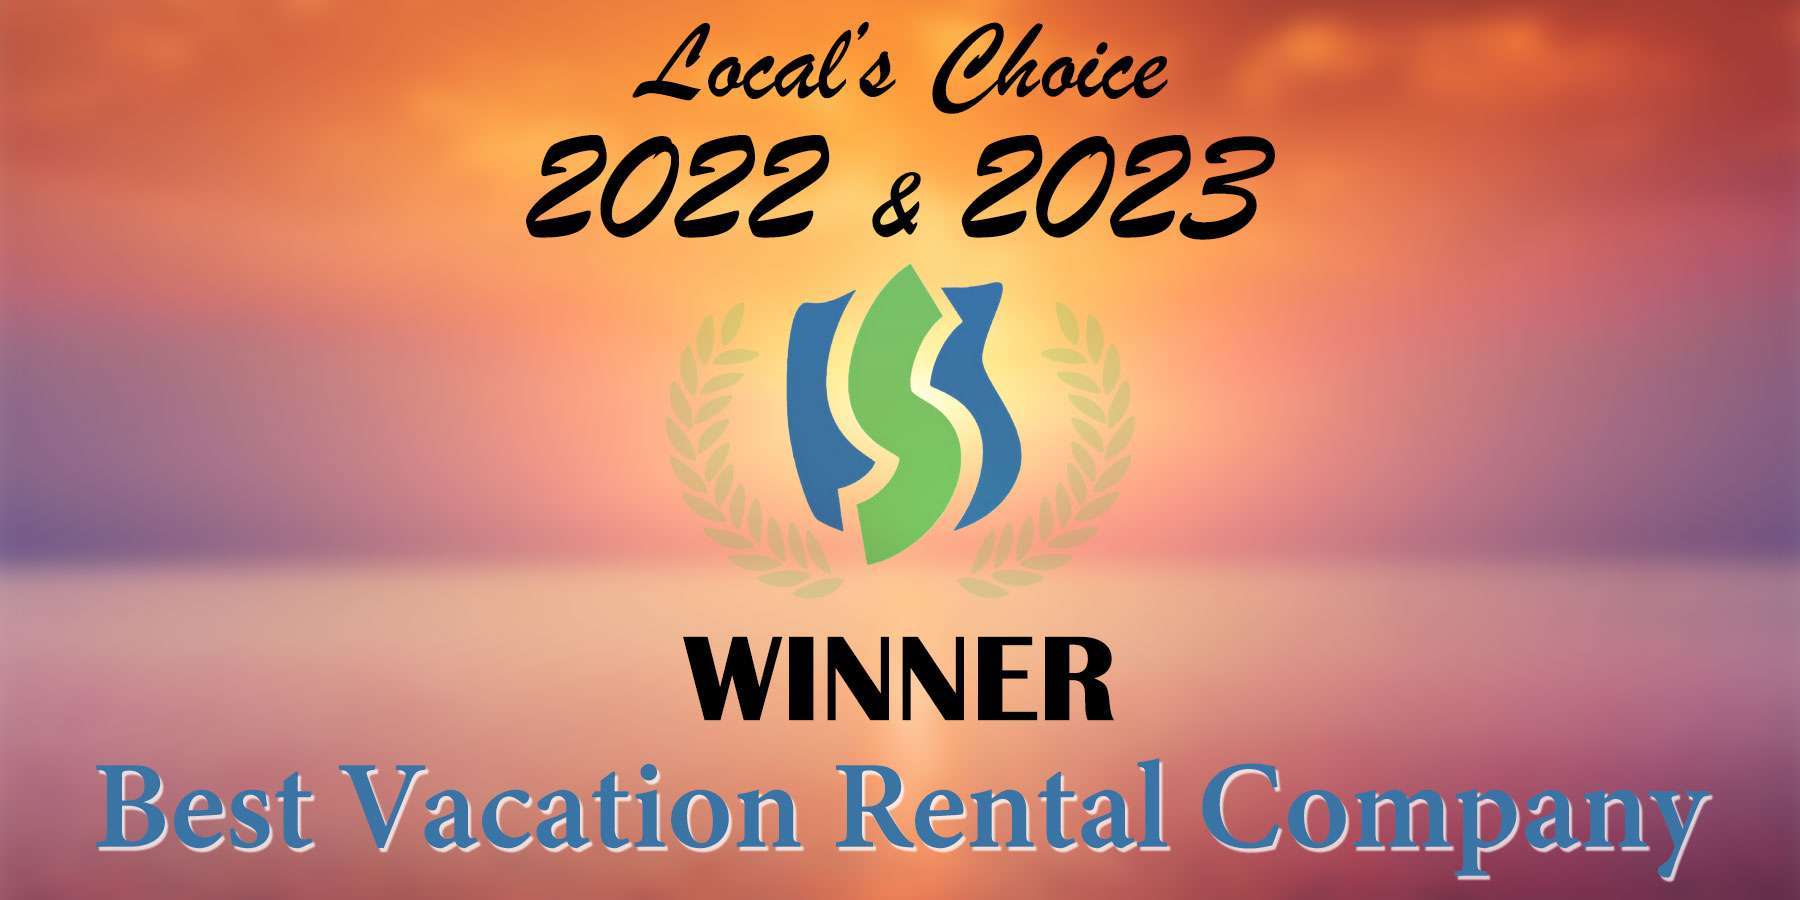 2023 Local's Choice - Best Vacation Rental Company